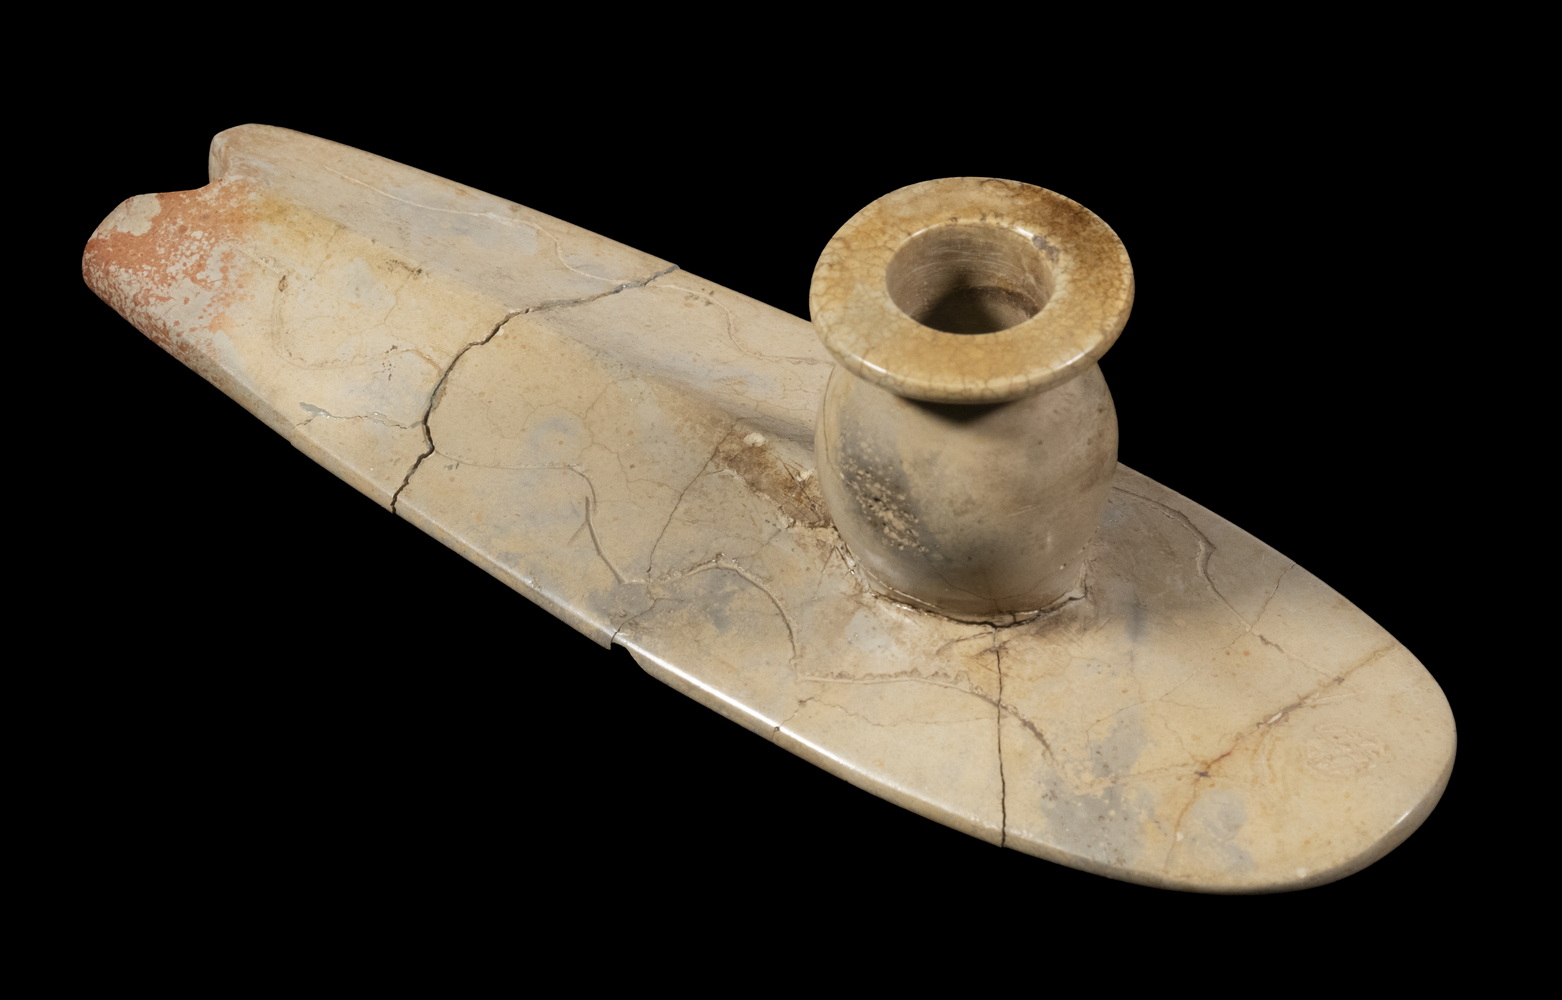 NATIVE AMERICAN PIPE Found in Ross Co,